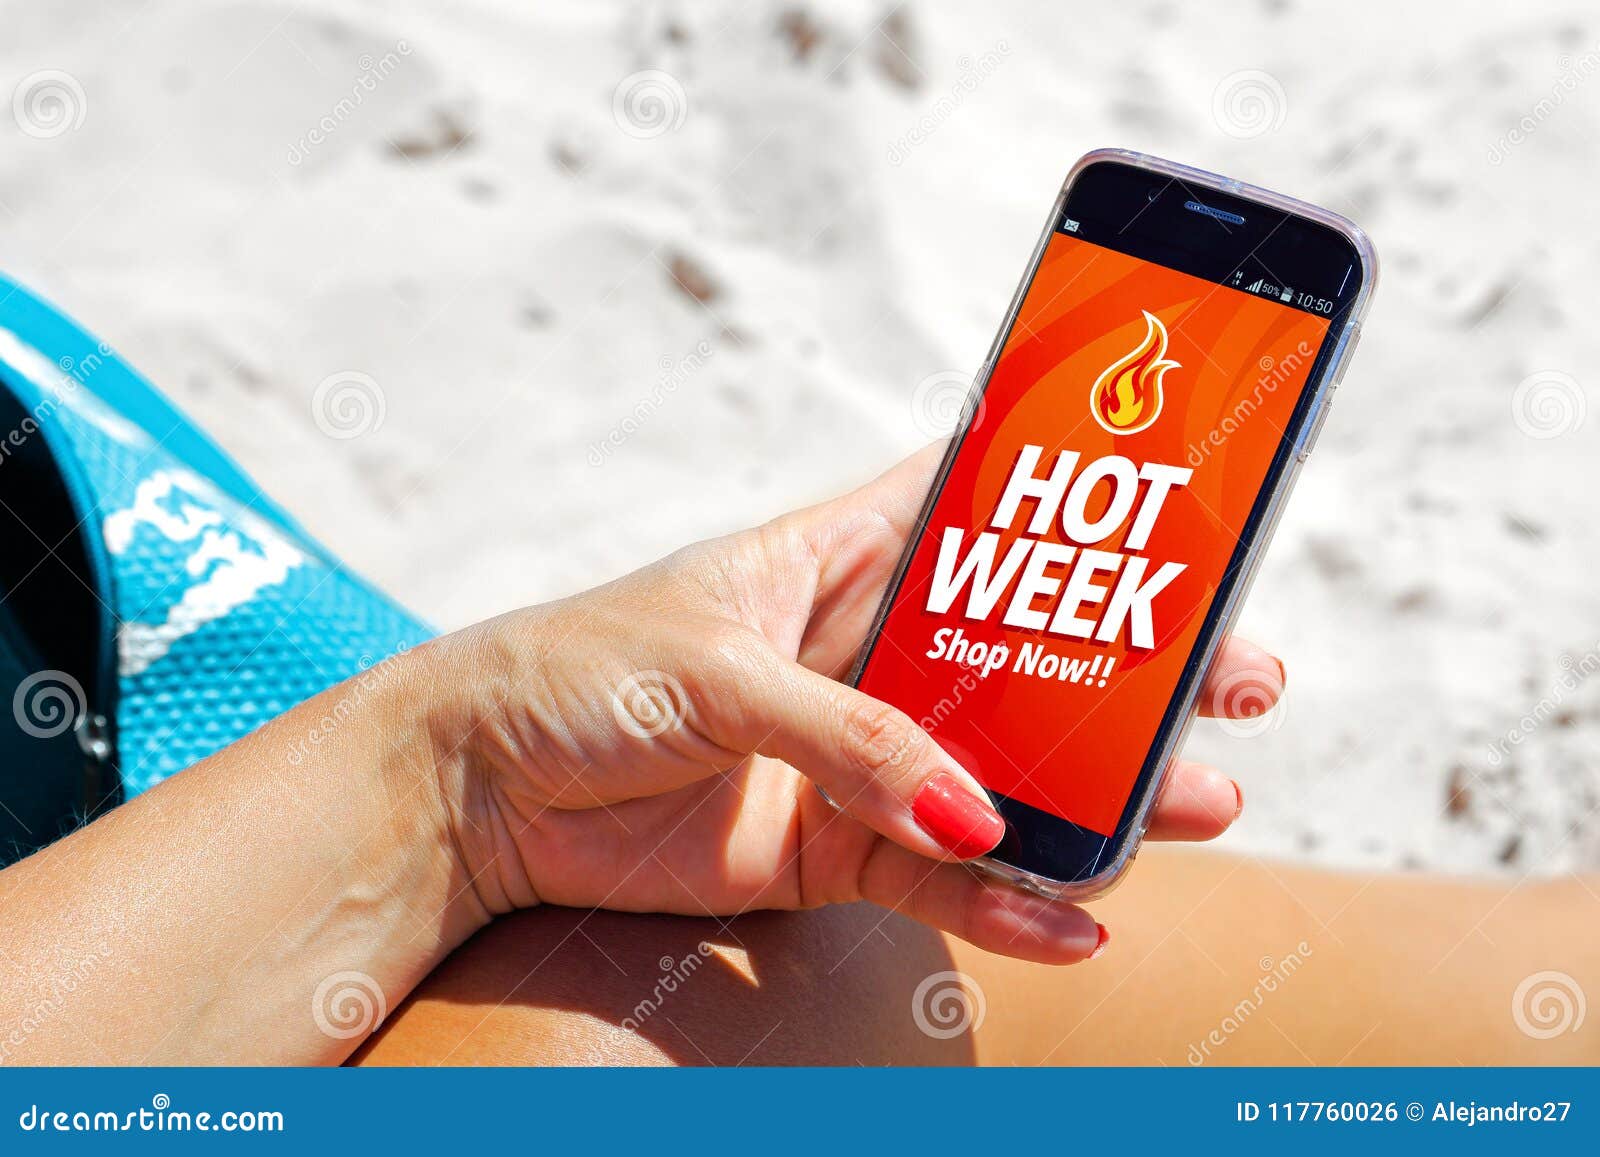 hot week advertising on cell phone.